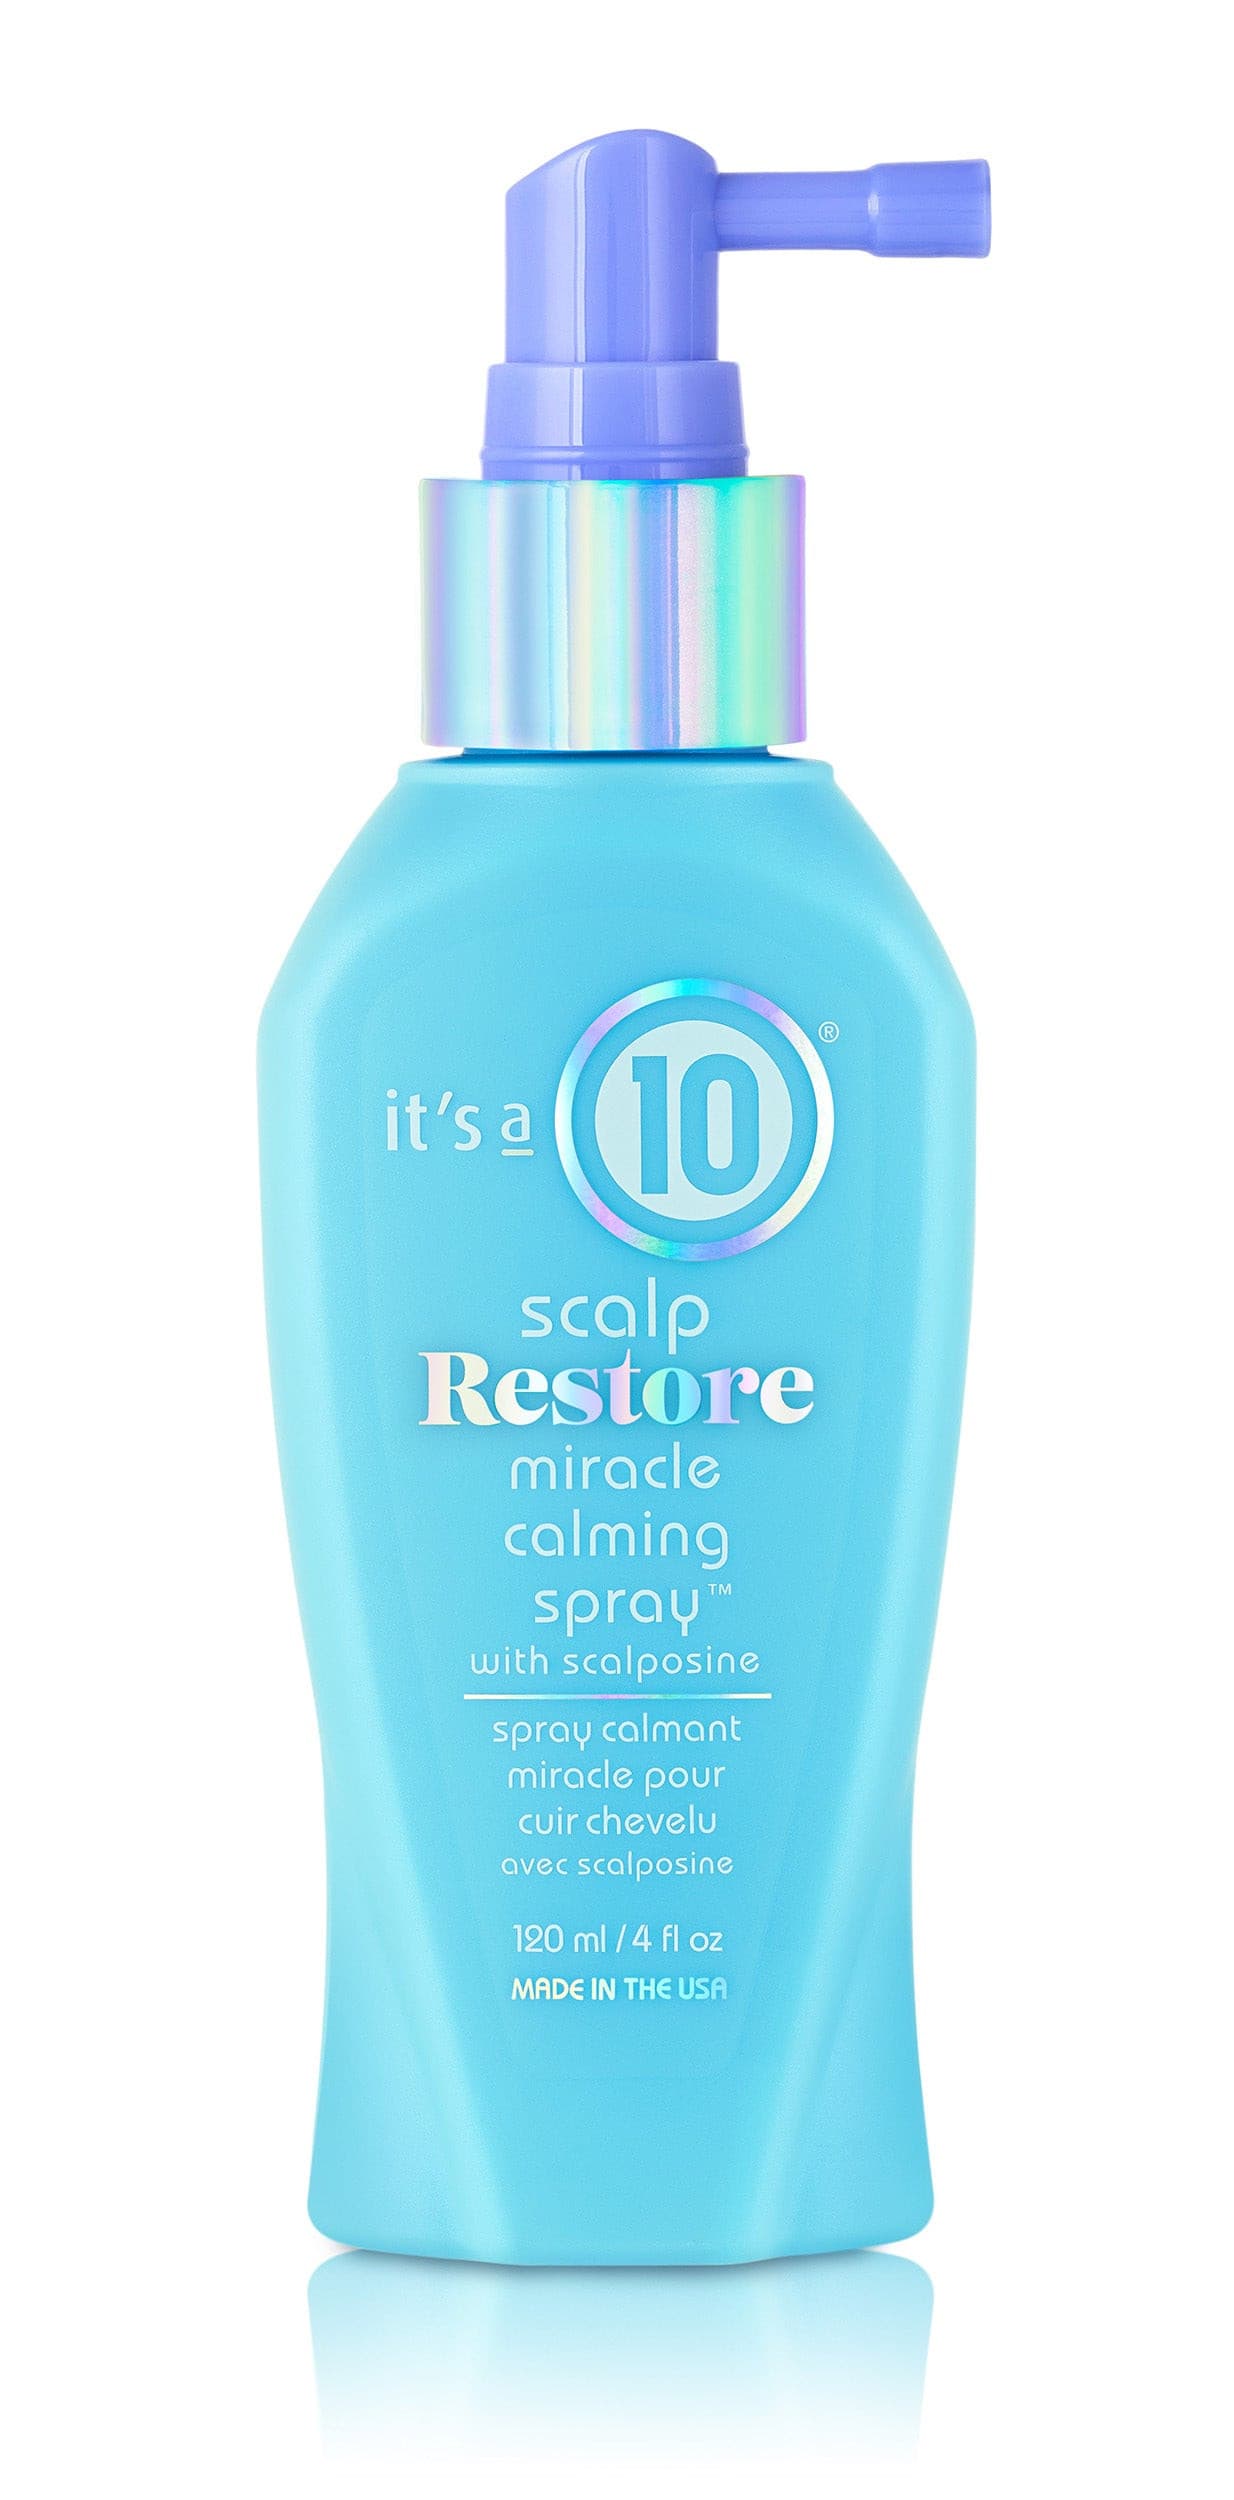 It’s a 10 Scalp Restore Miracle Calming Spray